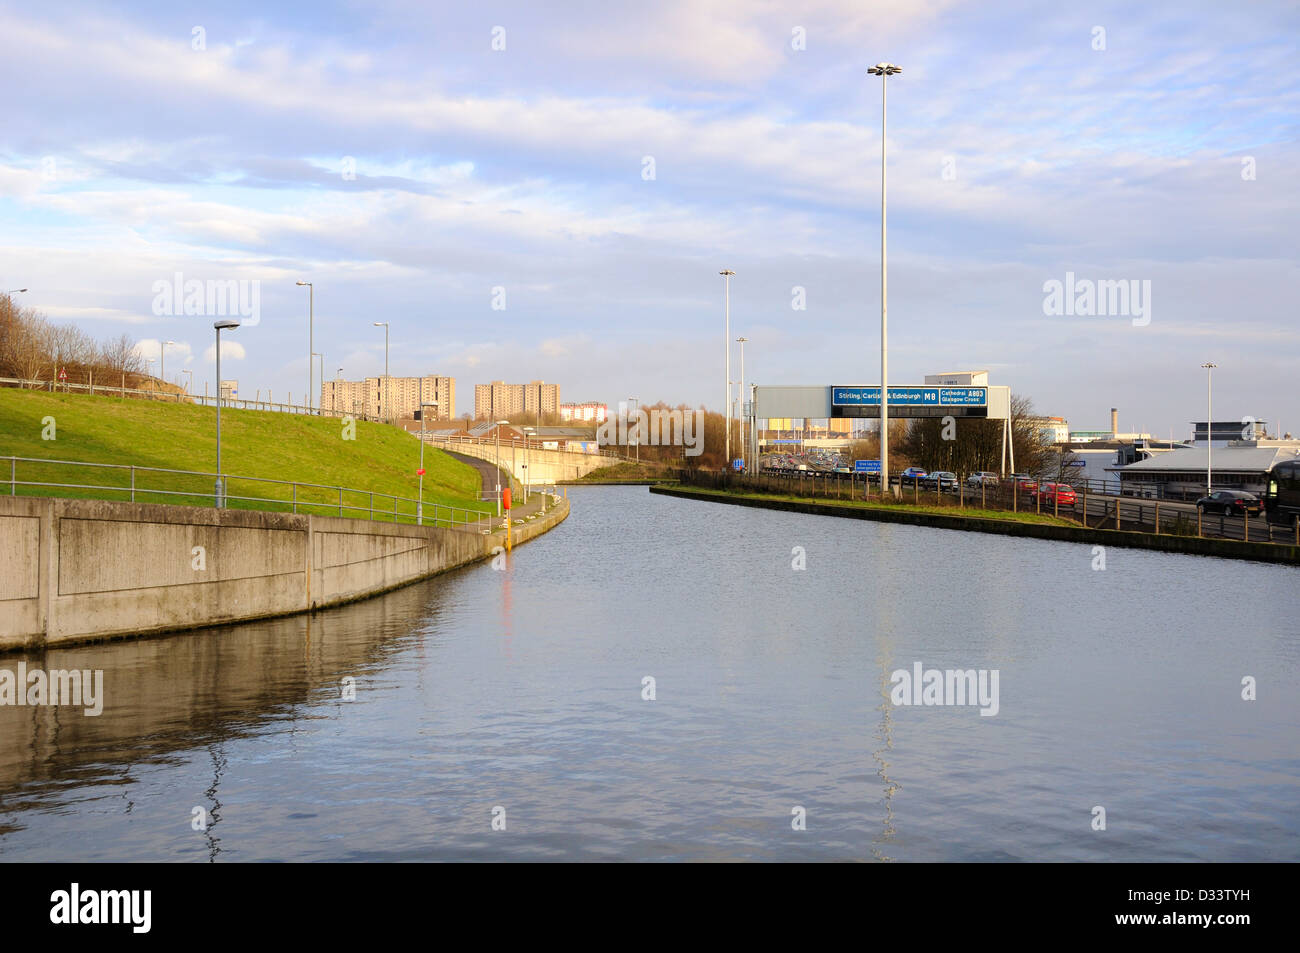 The Forth and Clyde canal in Glasgow, Scotland, UK Stock Photo